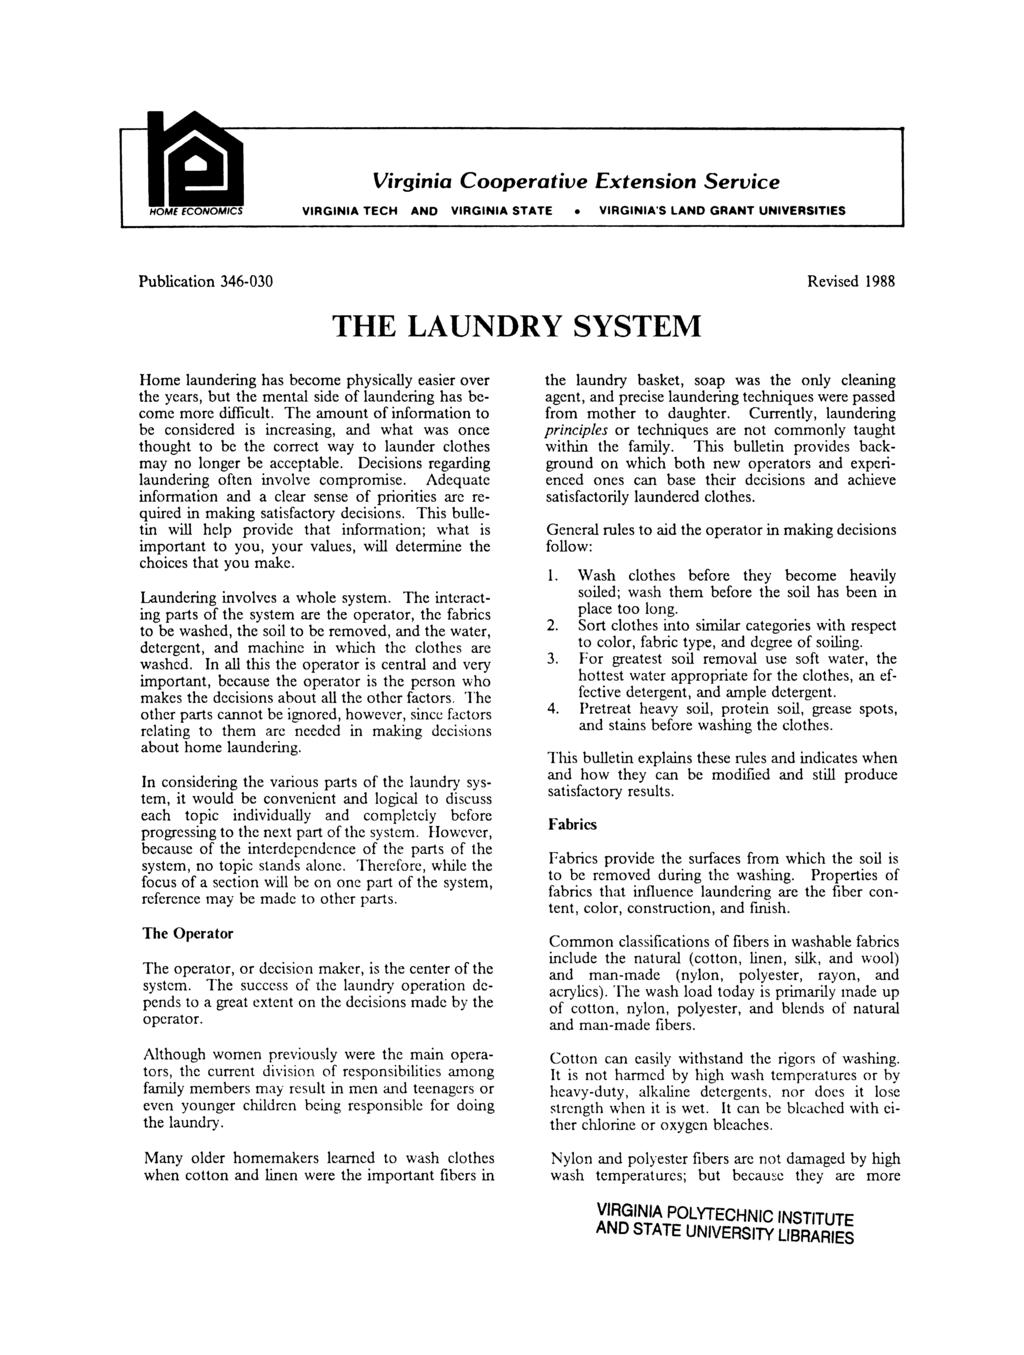 Virginia Cooperative Extension Service VIRGINIA TECH AND VIRGINIA STATE VIRGINIA'S LAND GRANT UNIVERSITIES Publication 346-030 Revised 1988 THE LAUNDRY SYSTEM Home laundering has become physically